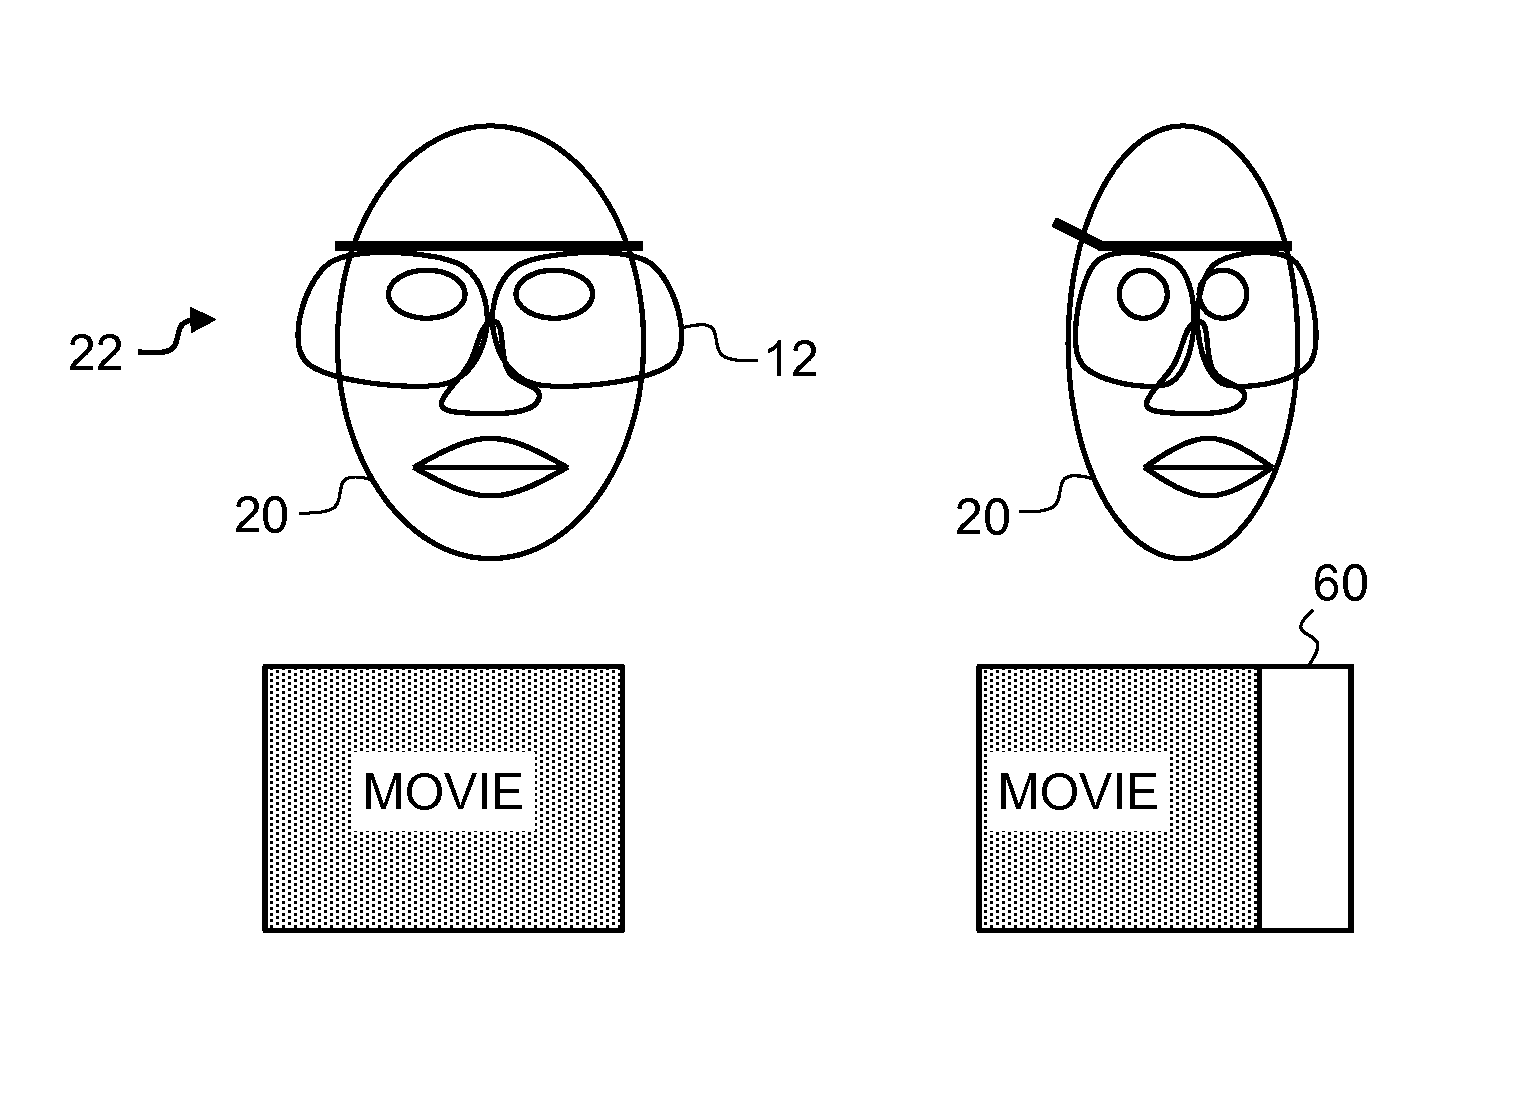 Head-mounted display with environmental state detection